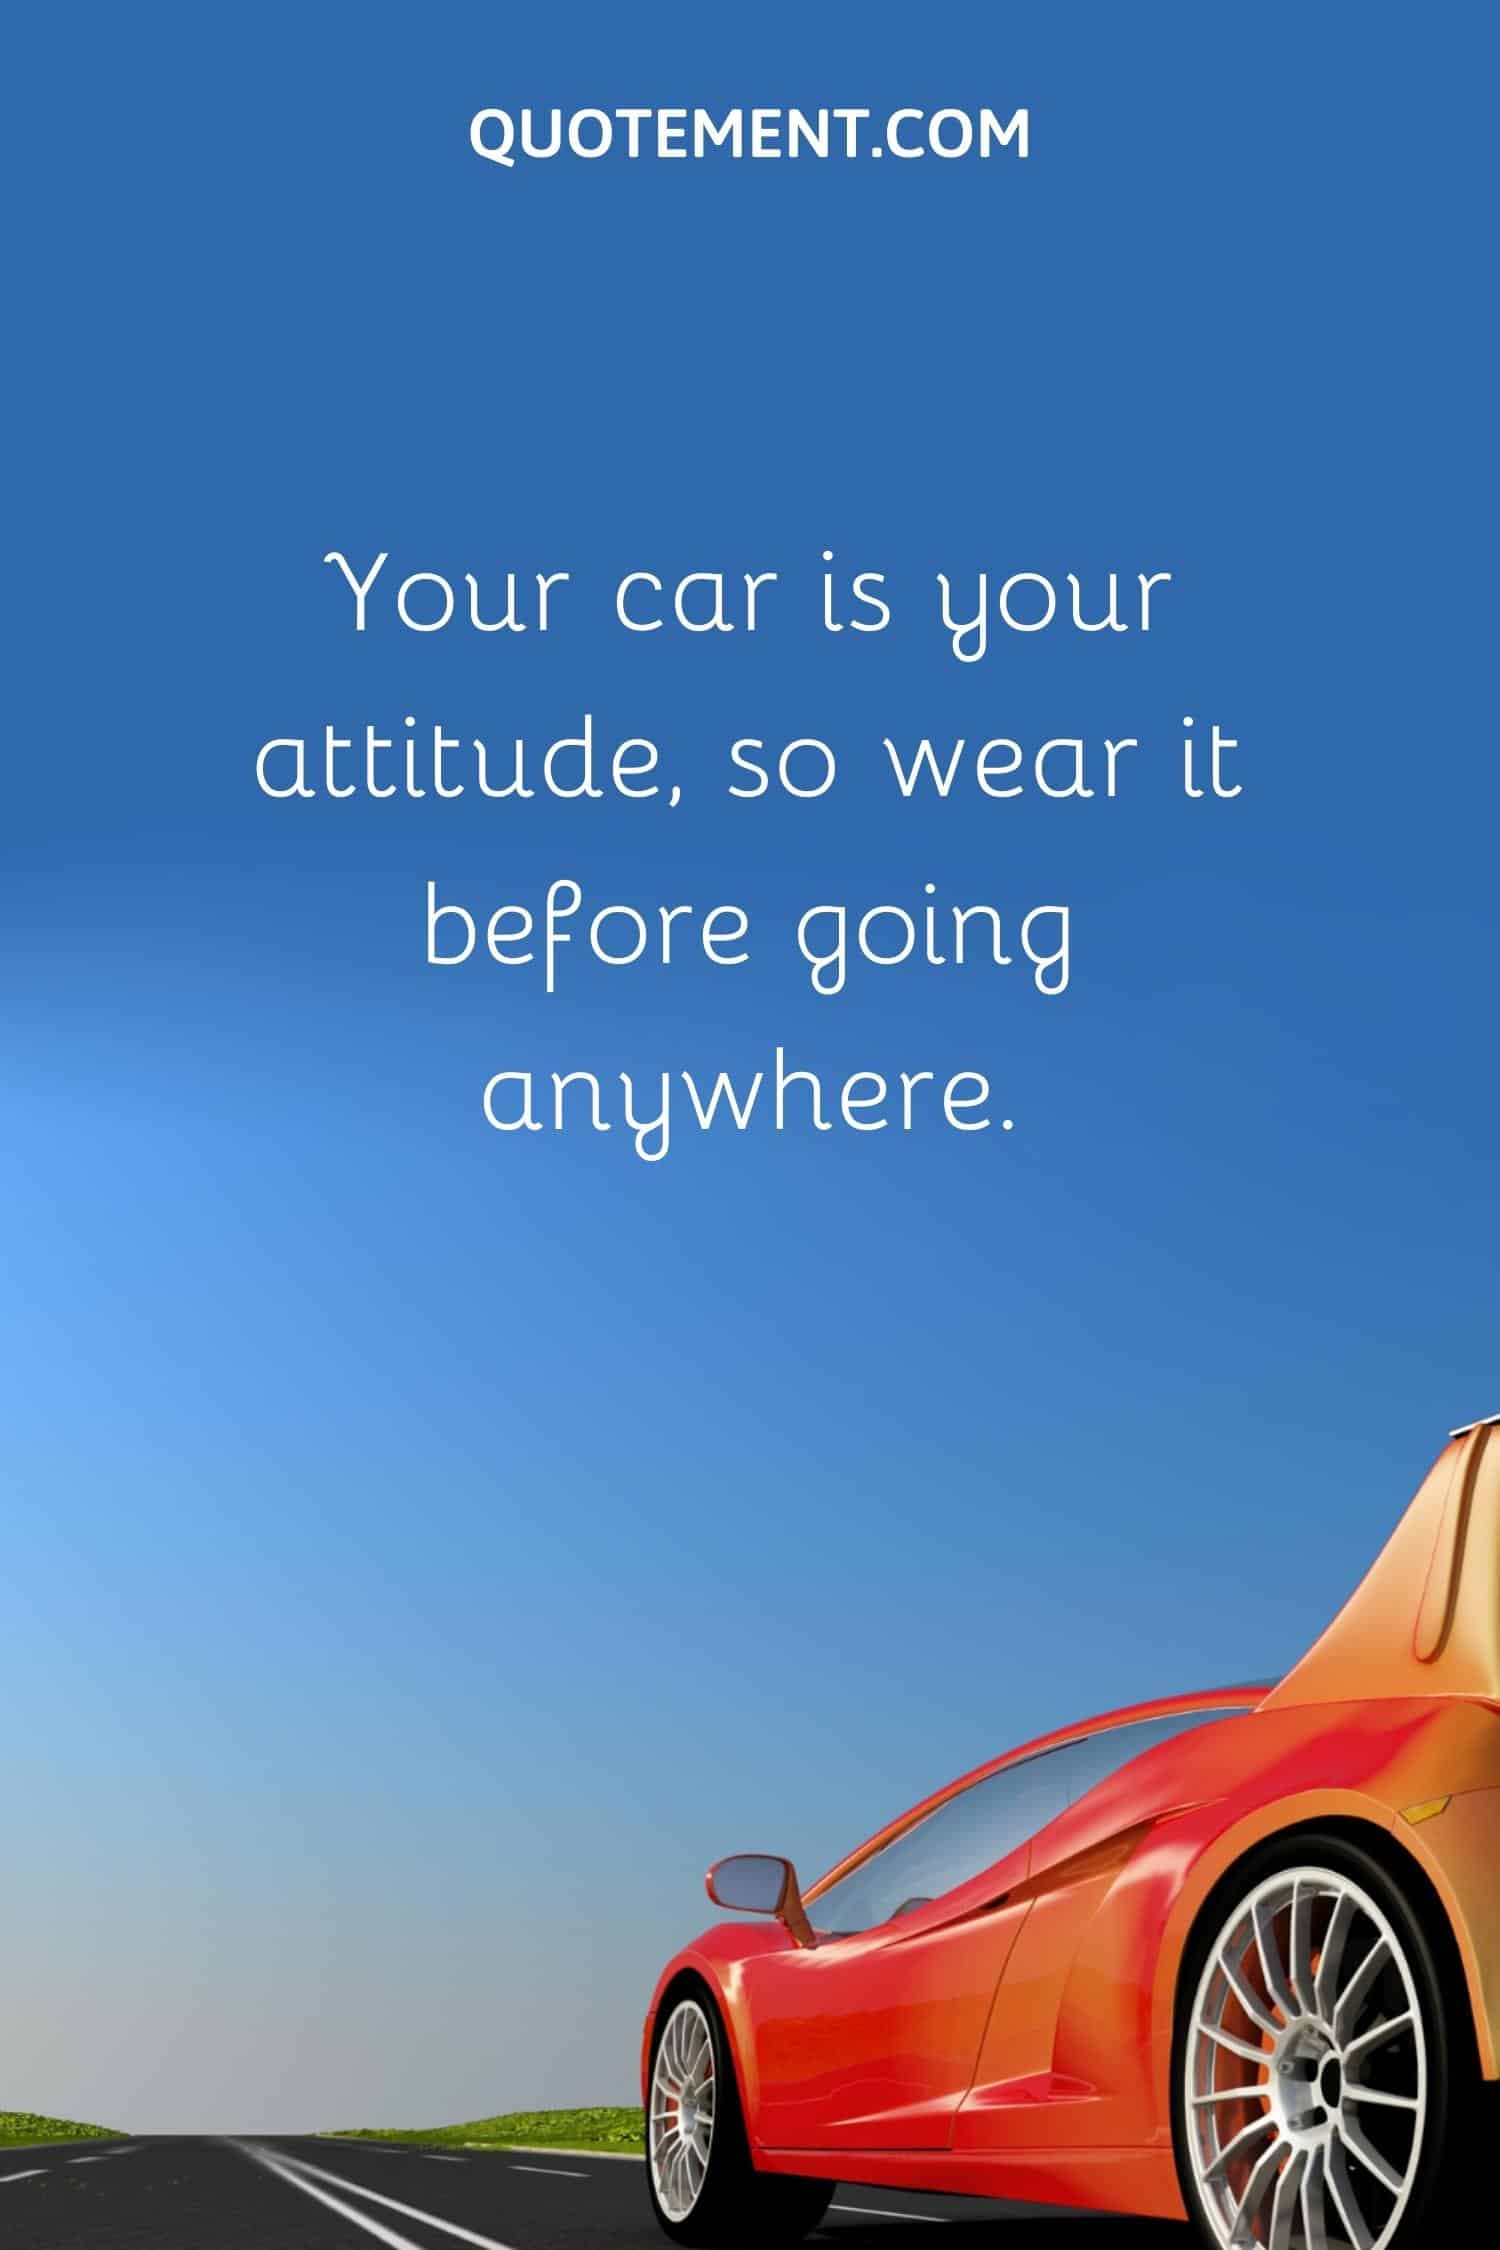 Your car is your attitude